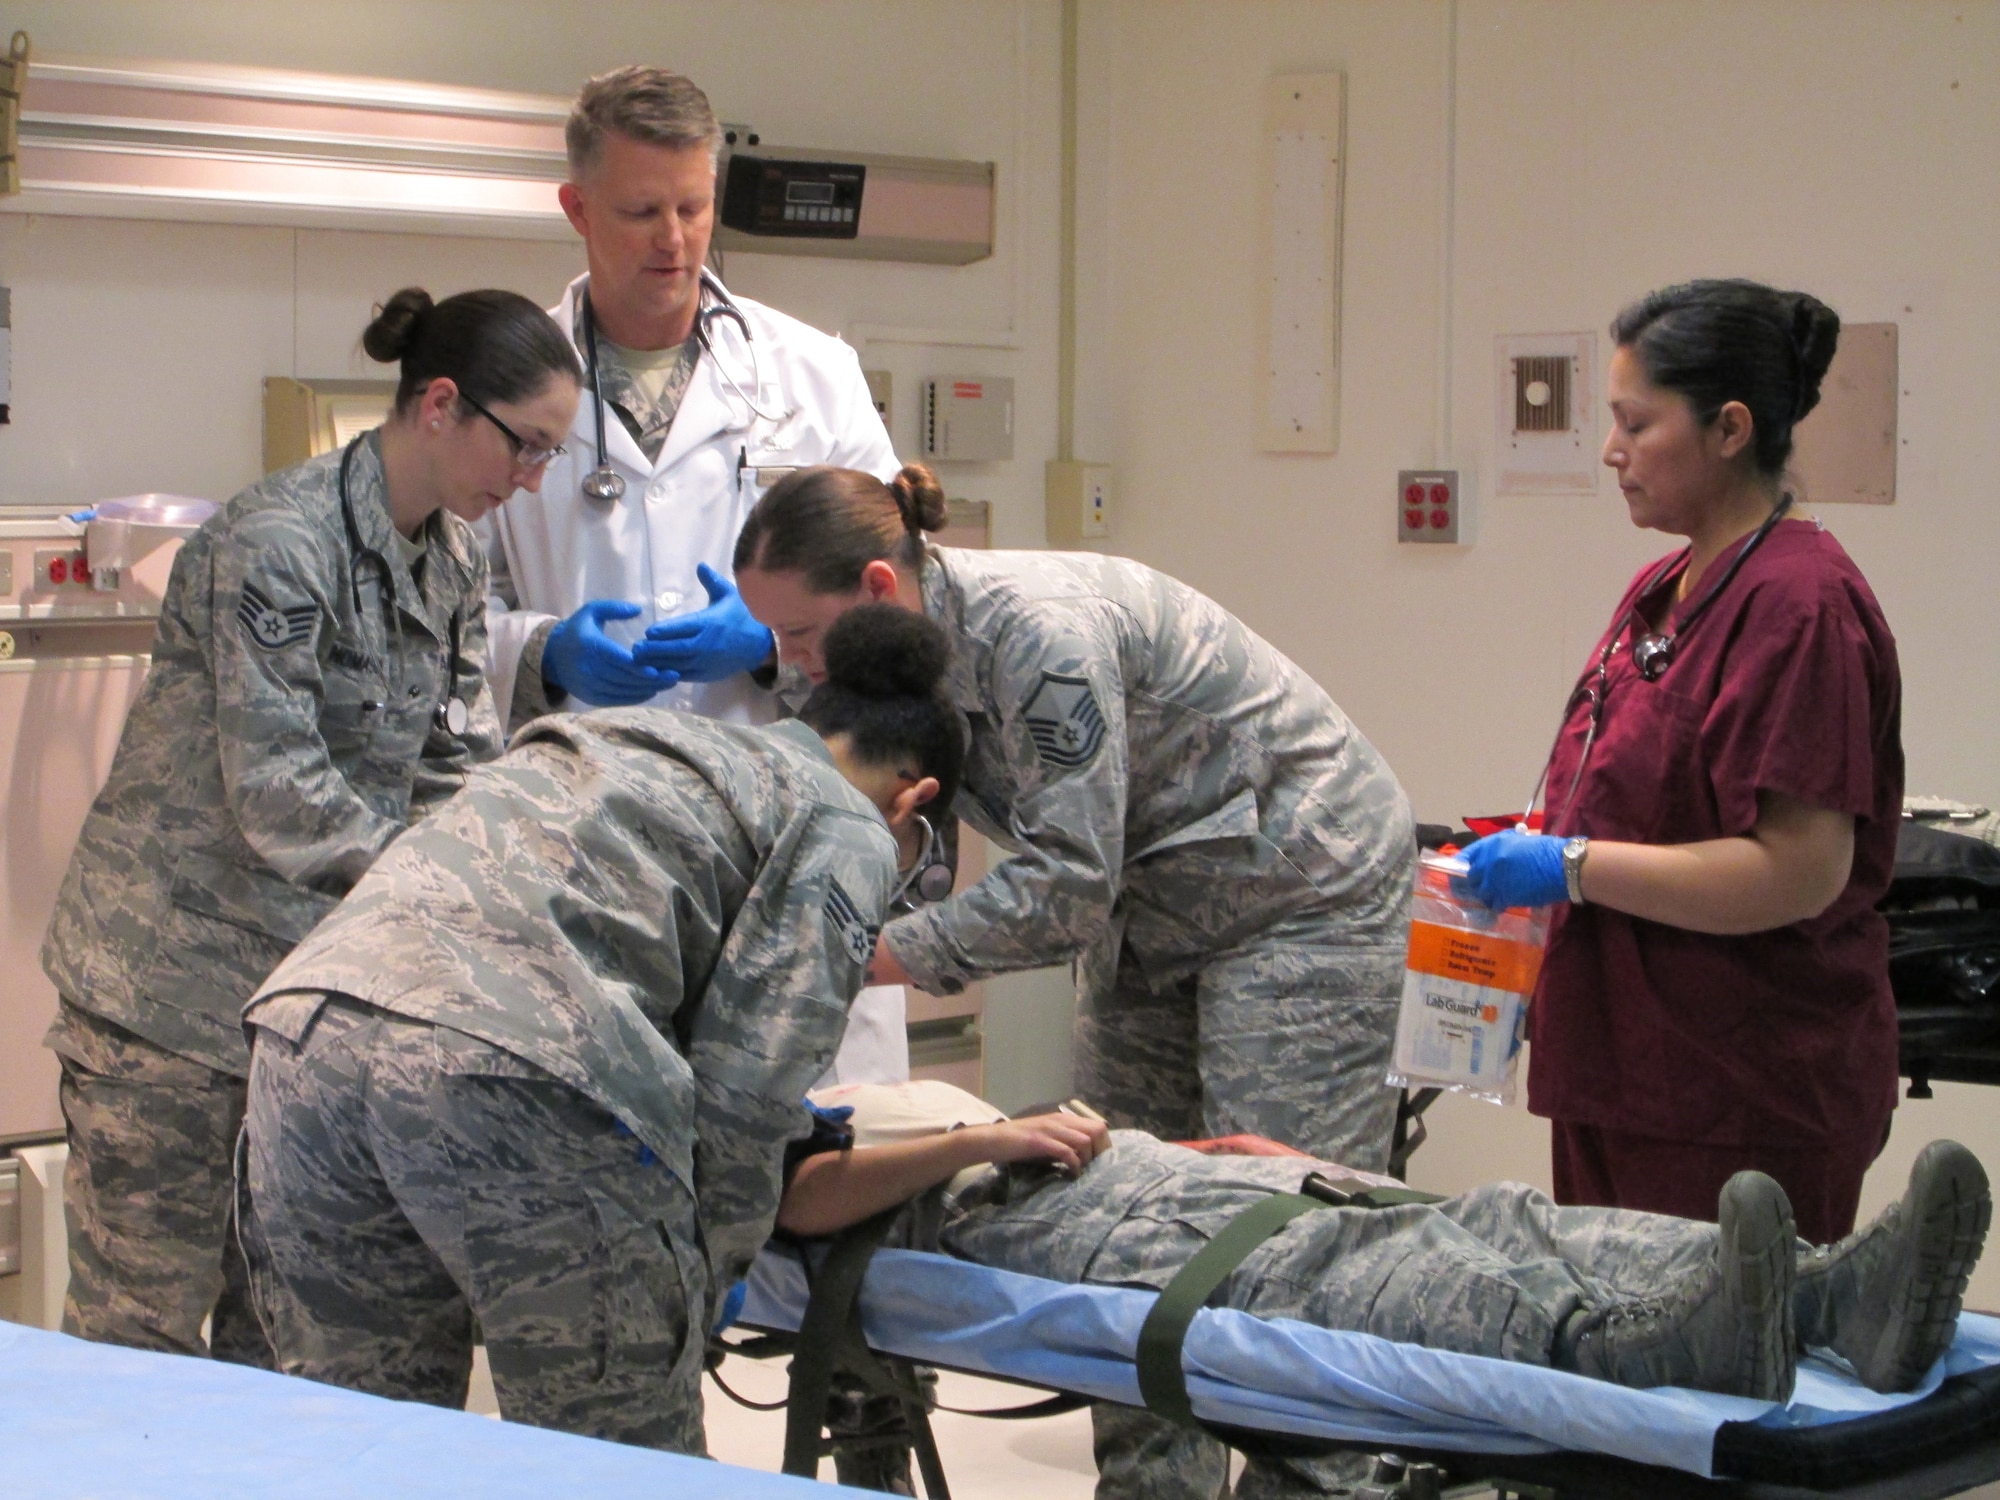 Col Christopher Scharenbrock oversees his team's care of a simulated trauma victim during a training held at Joint Base Andrews January 10, 2013. The training is to ensure the medical team is ready to be part of the 57th Presidential Inauguration as a medical response unit. Scharenbrock is an emergent care physician with the 79th Medical Wing. (U.S. Air Force Photo/Melanie Moore)